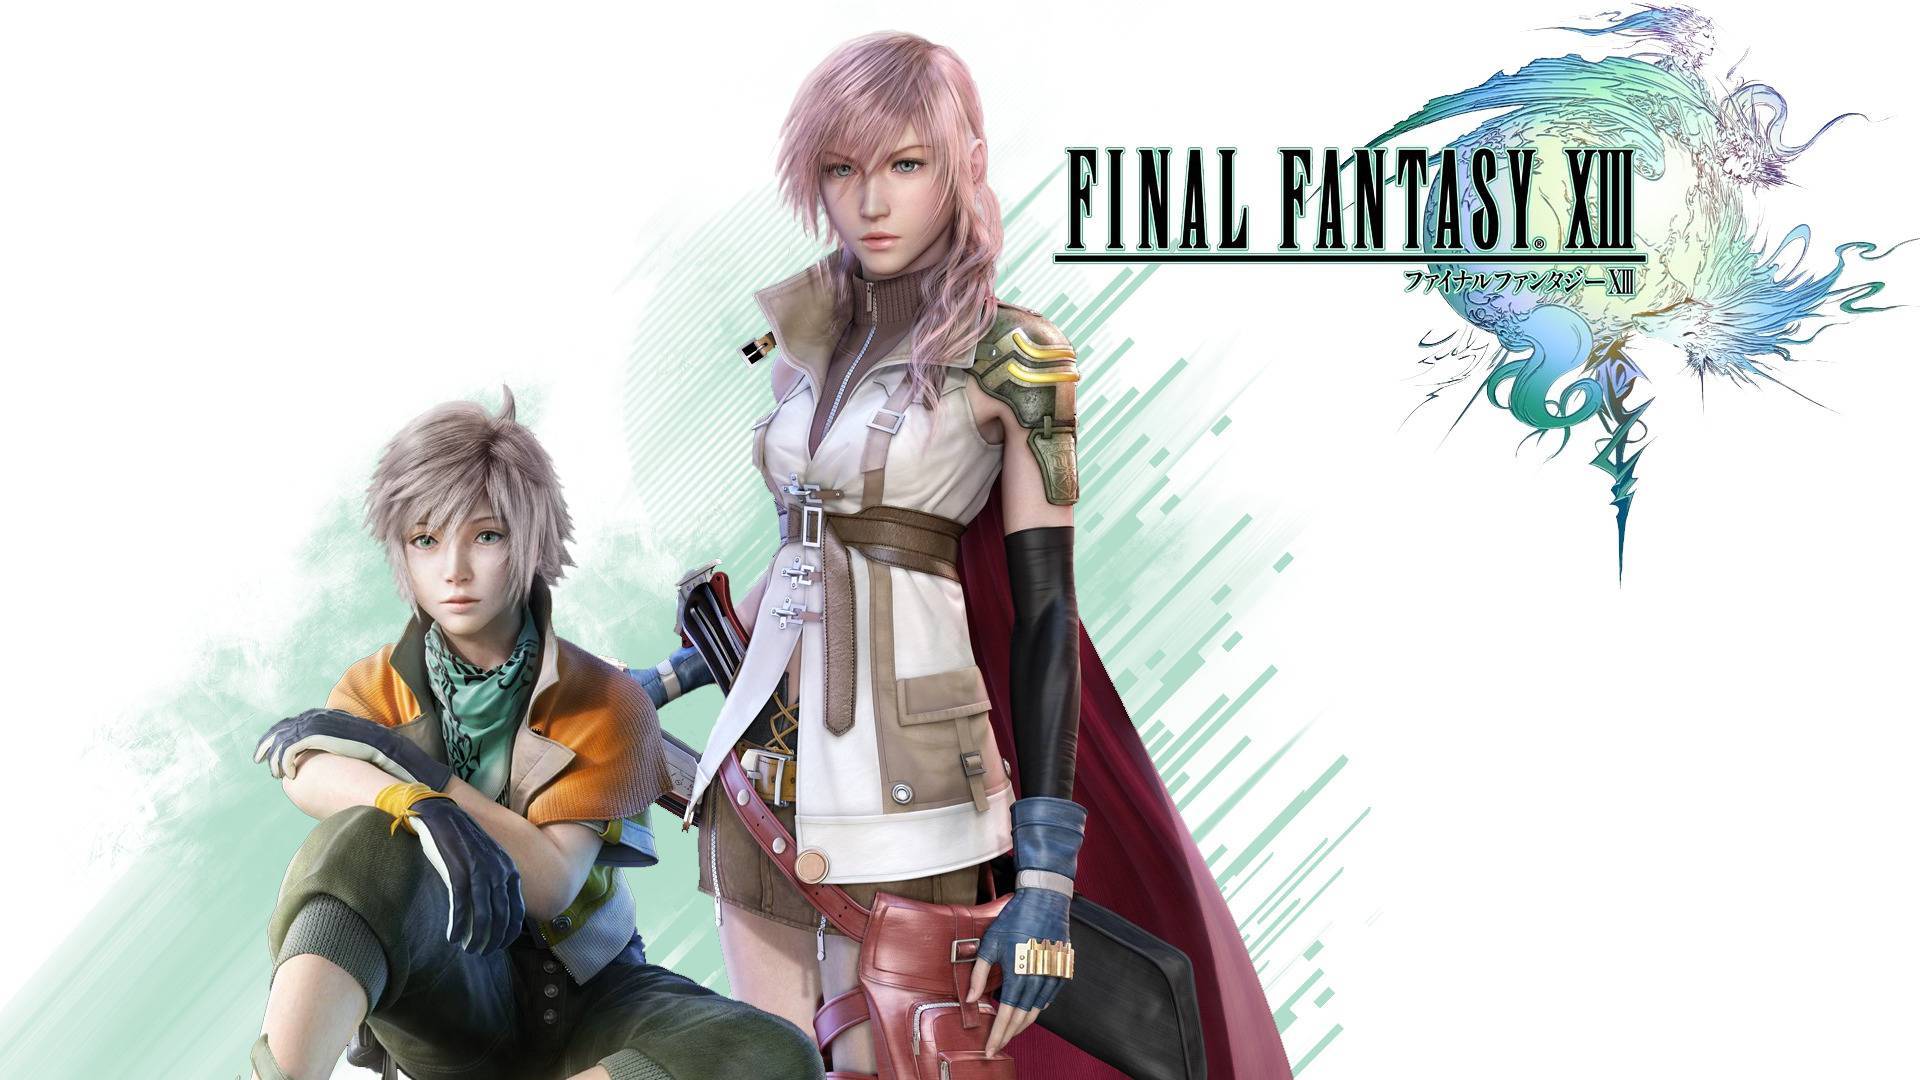 Final Fantasy XIII and XIII-2 Bundle (PC) Key cheap - Price of $9.89 for  Steam